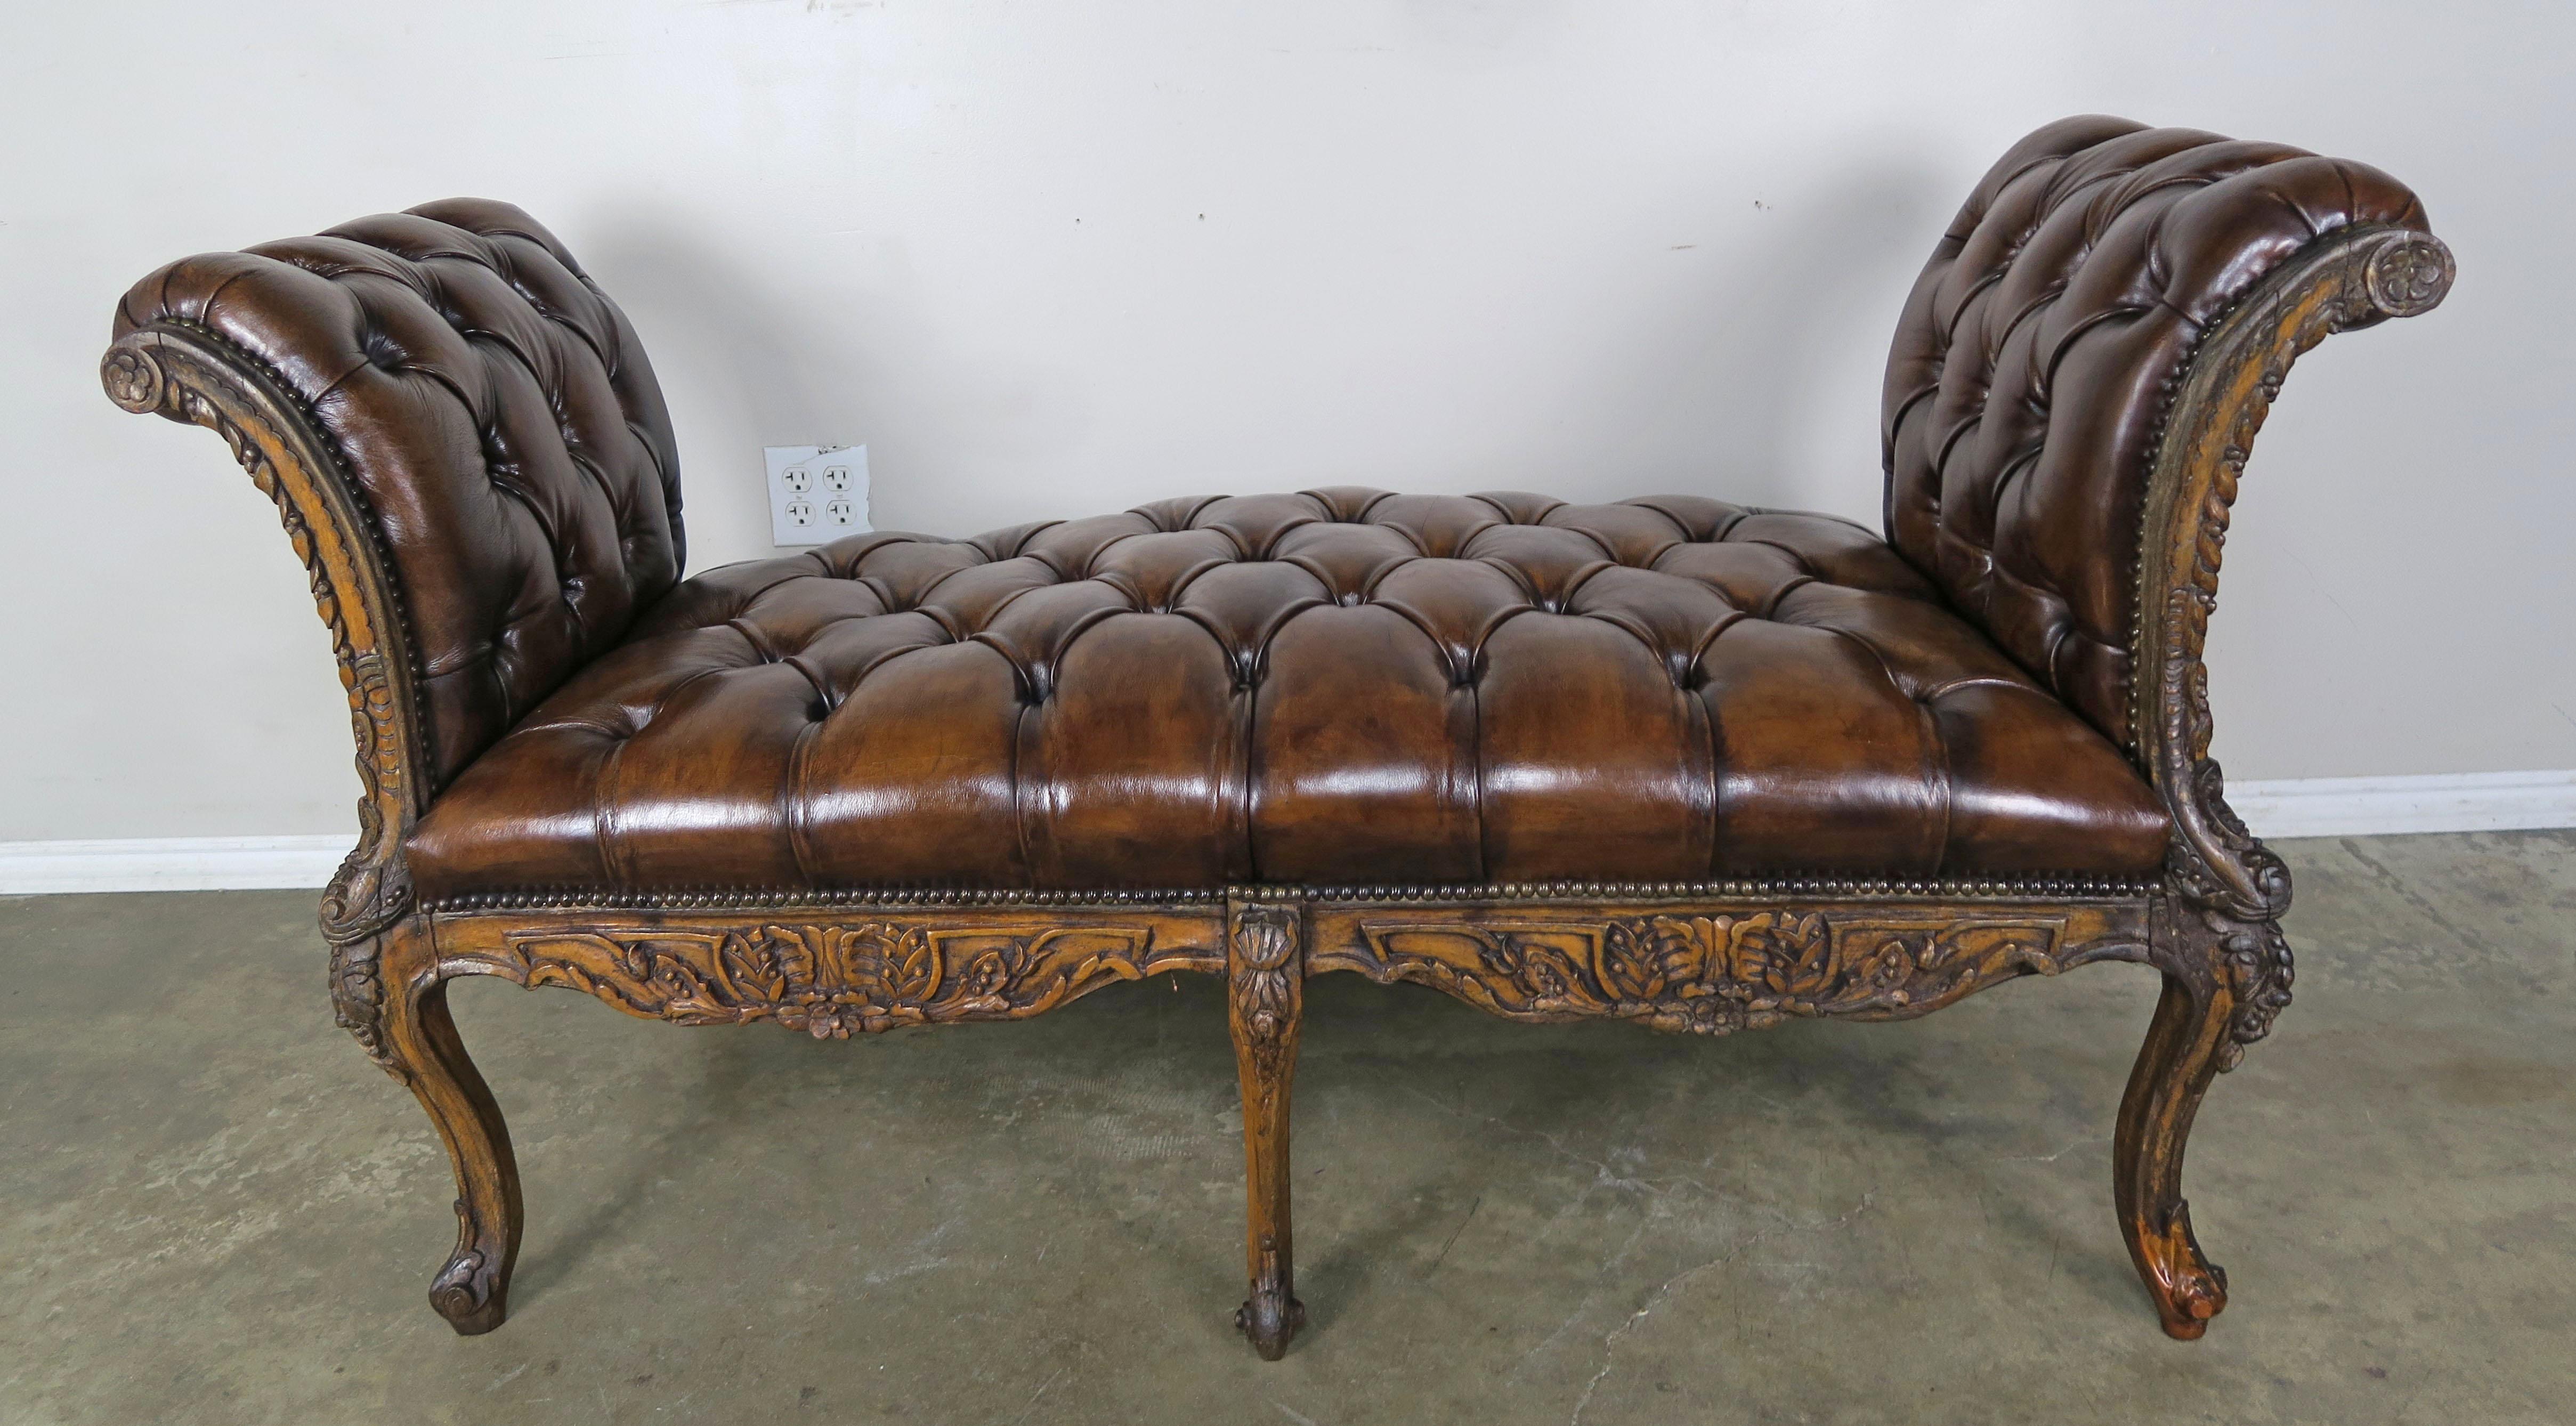 19th Century French Leather Six-Legged Tufted Bench 7